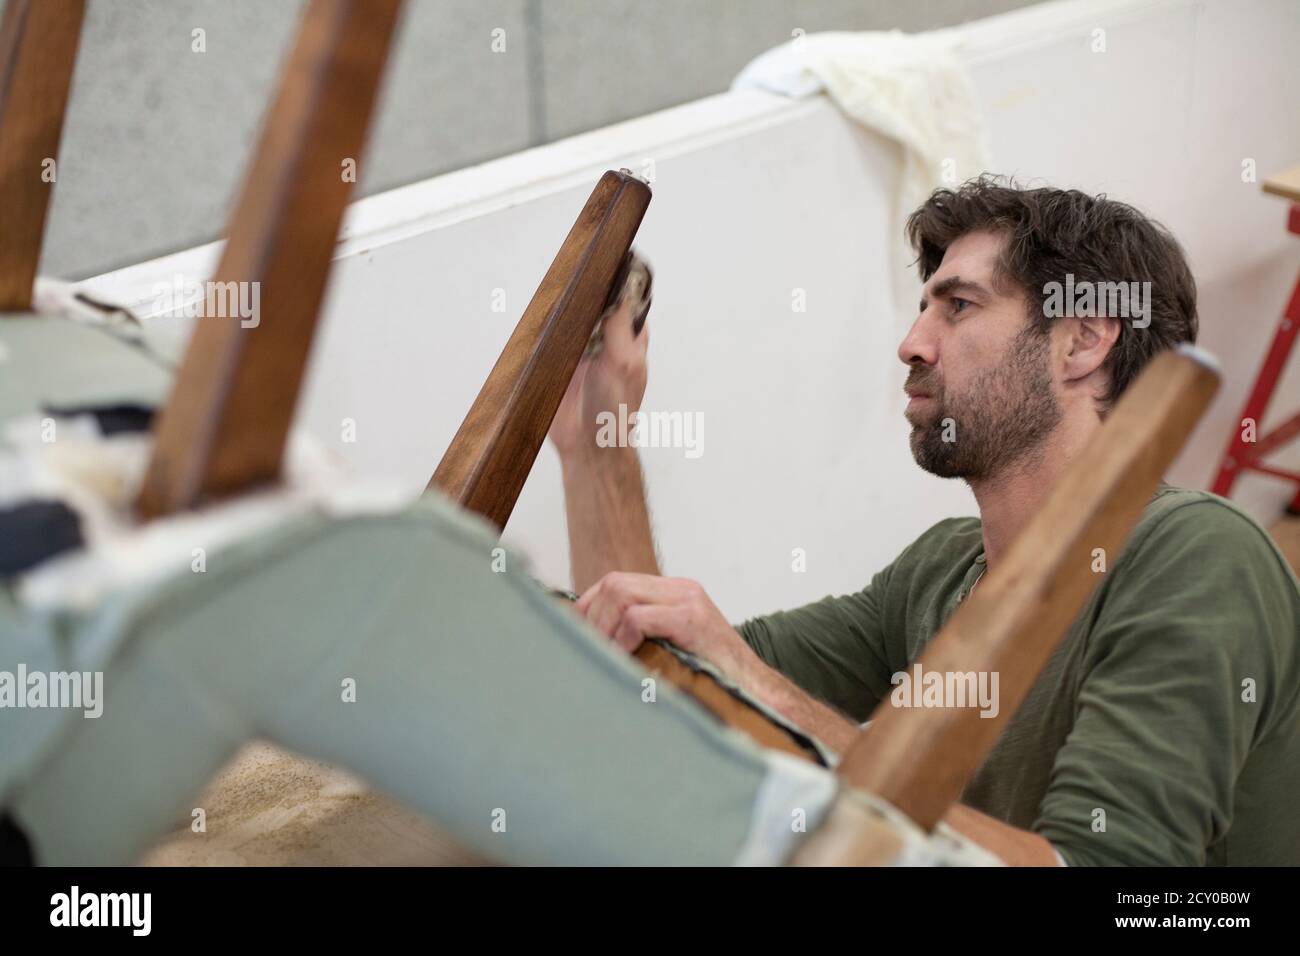 A focused craftsman polishes the leg of an antique chair Stock Photo